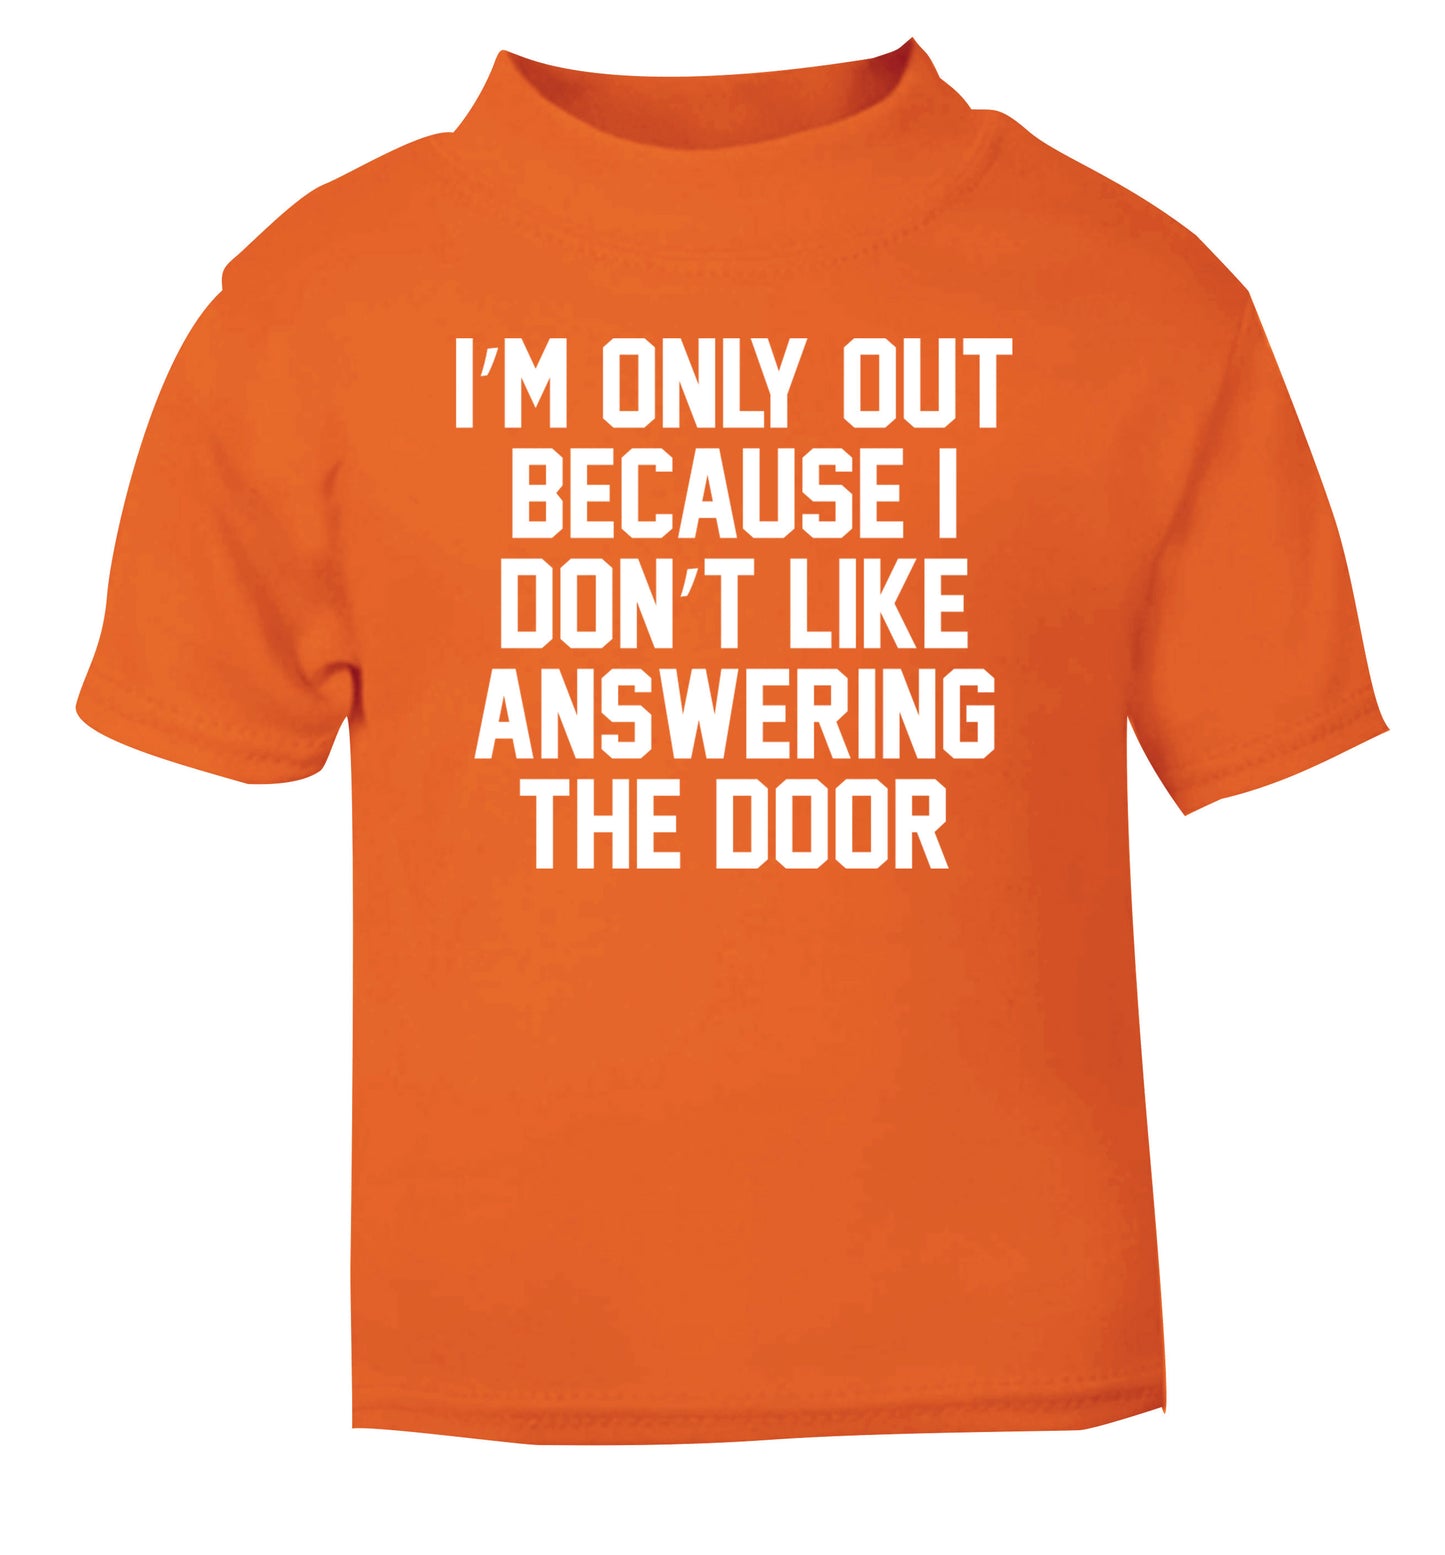 I'm only out because I don't like answering the door orange Baby Toddler Tshirt 2 Years